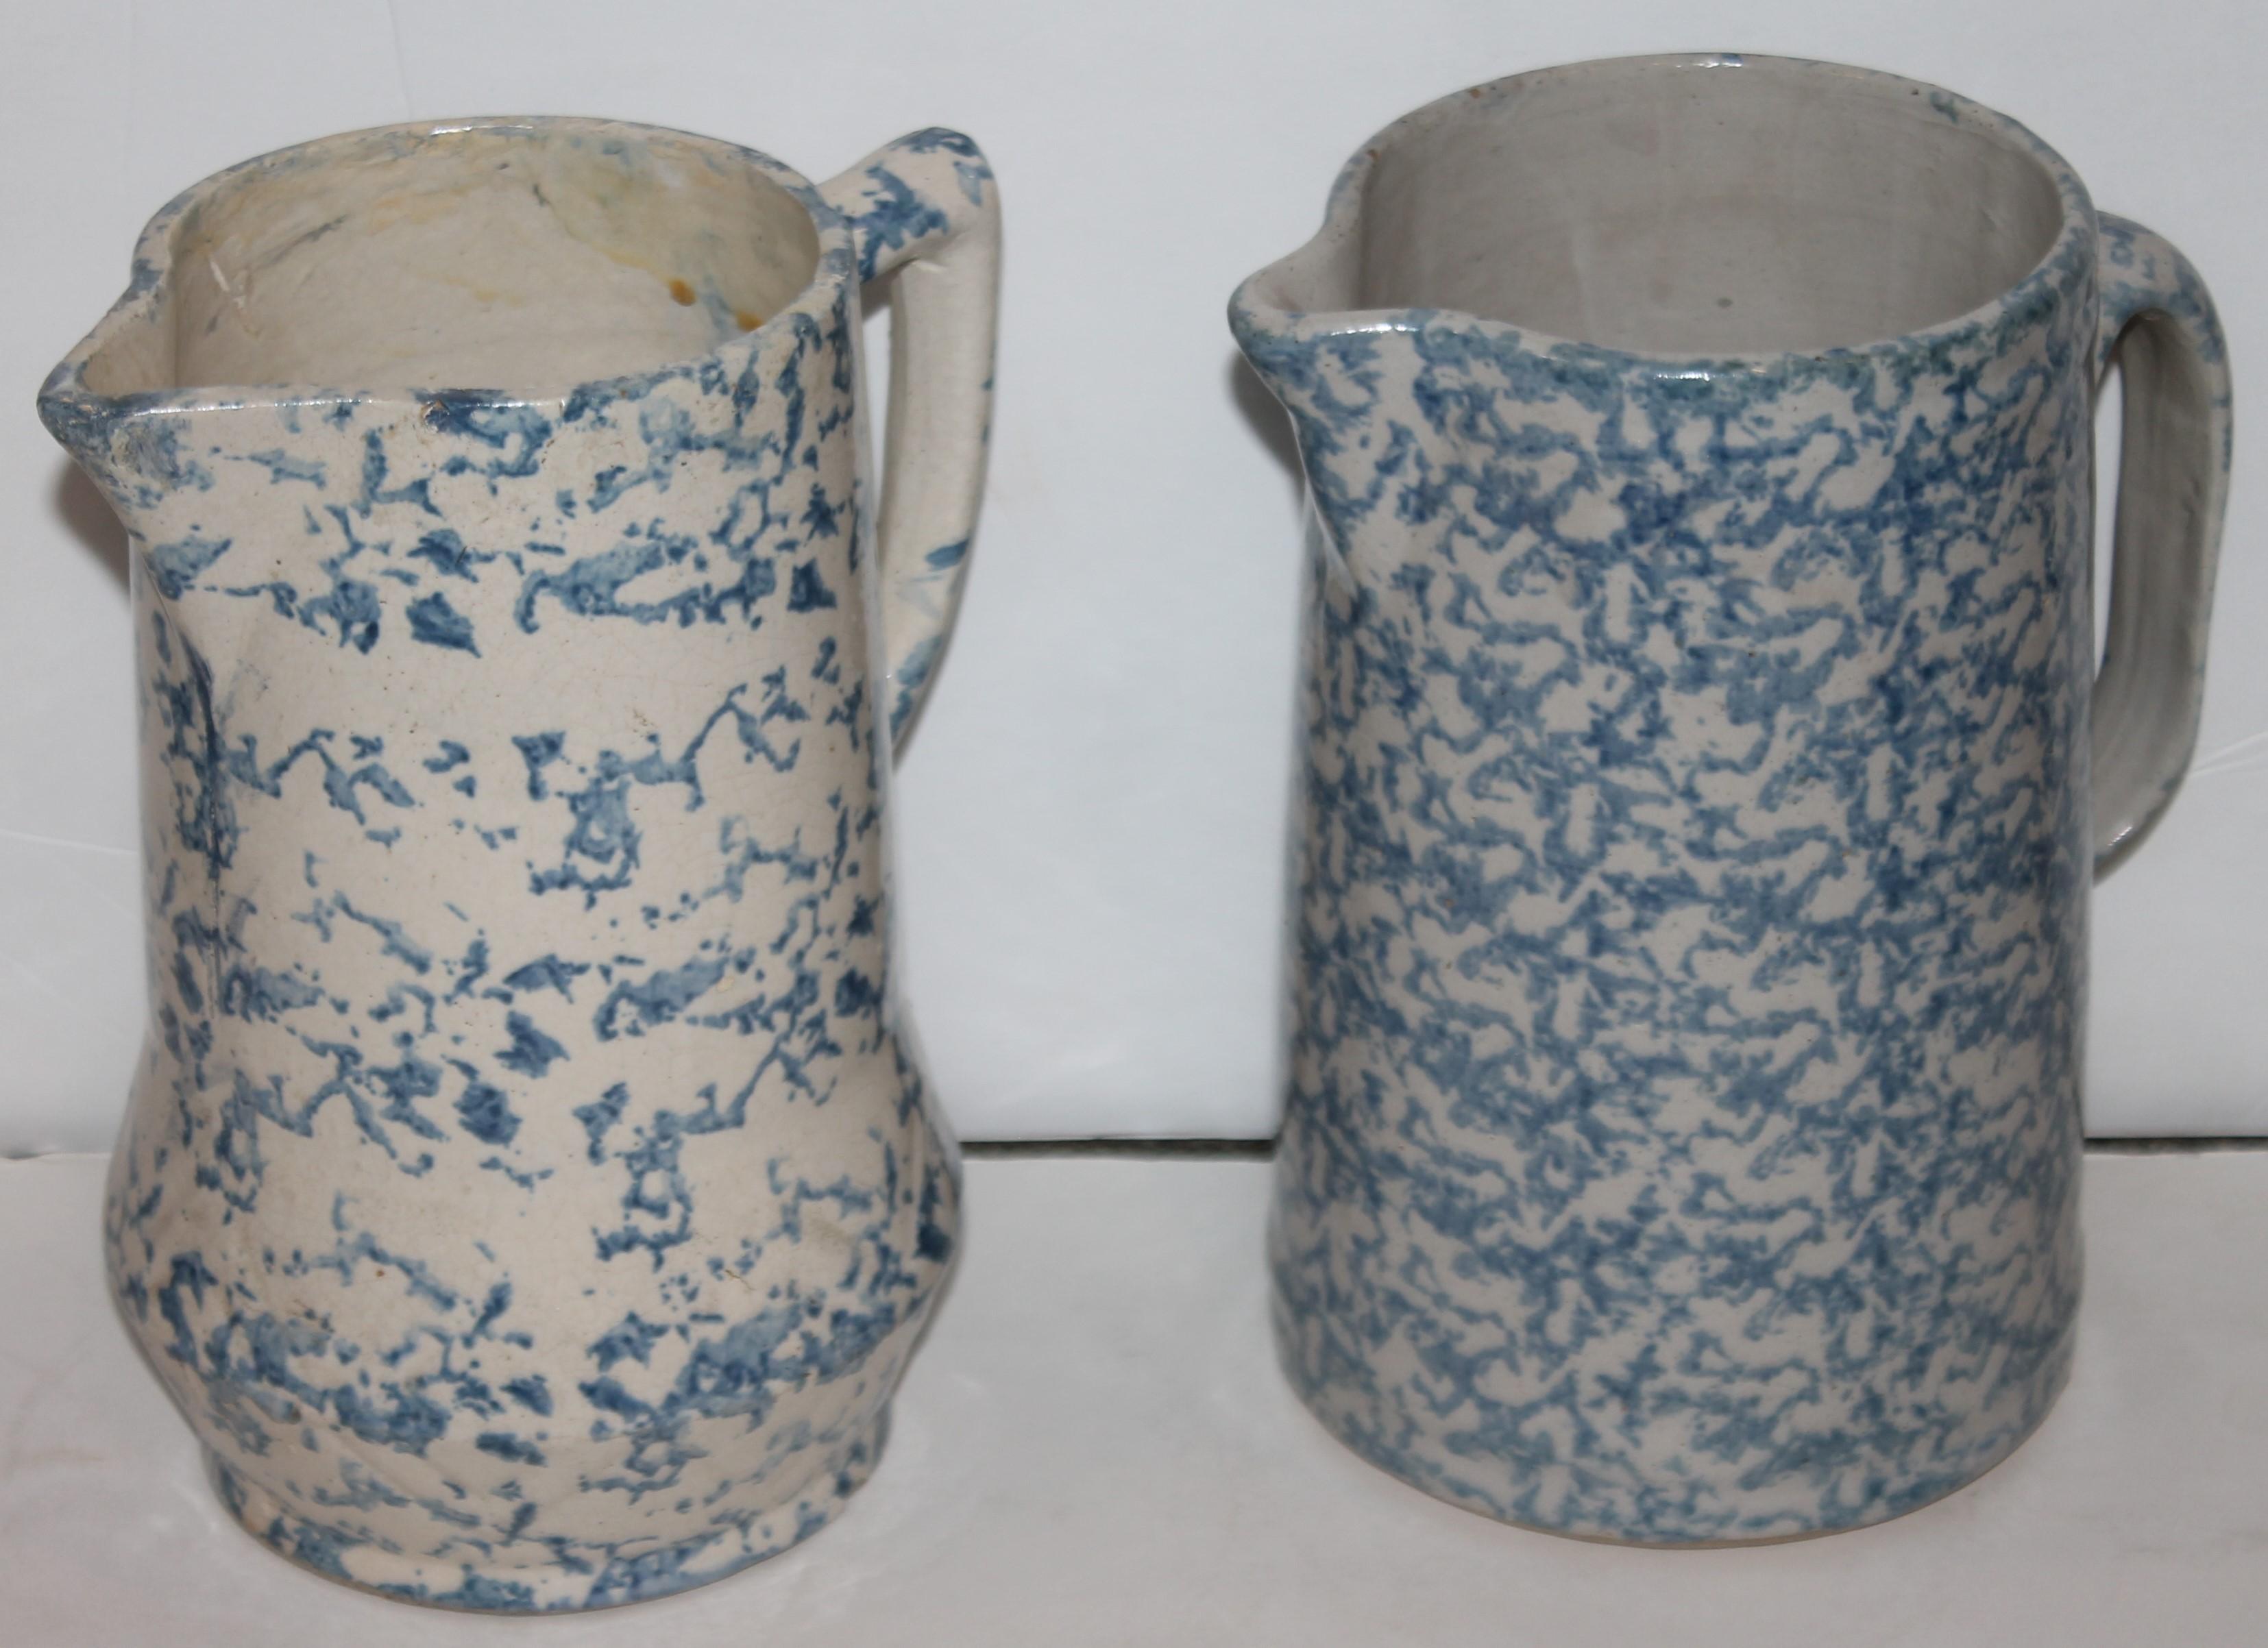 Collection of 19th Century Sponge Ware Pottery Pitchers-4 1